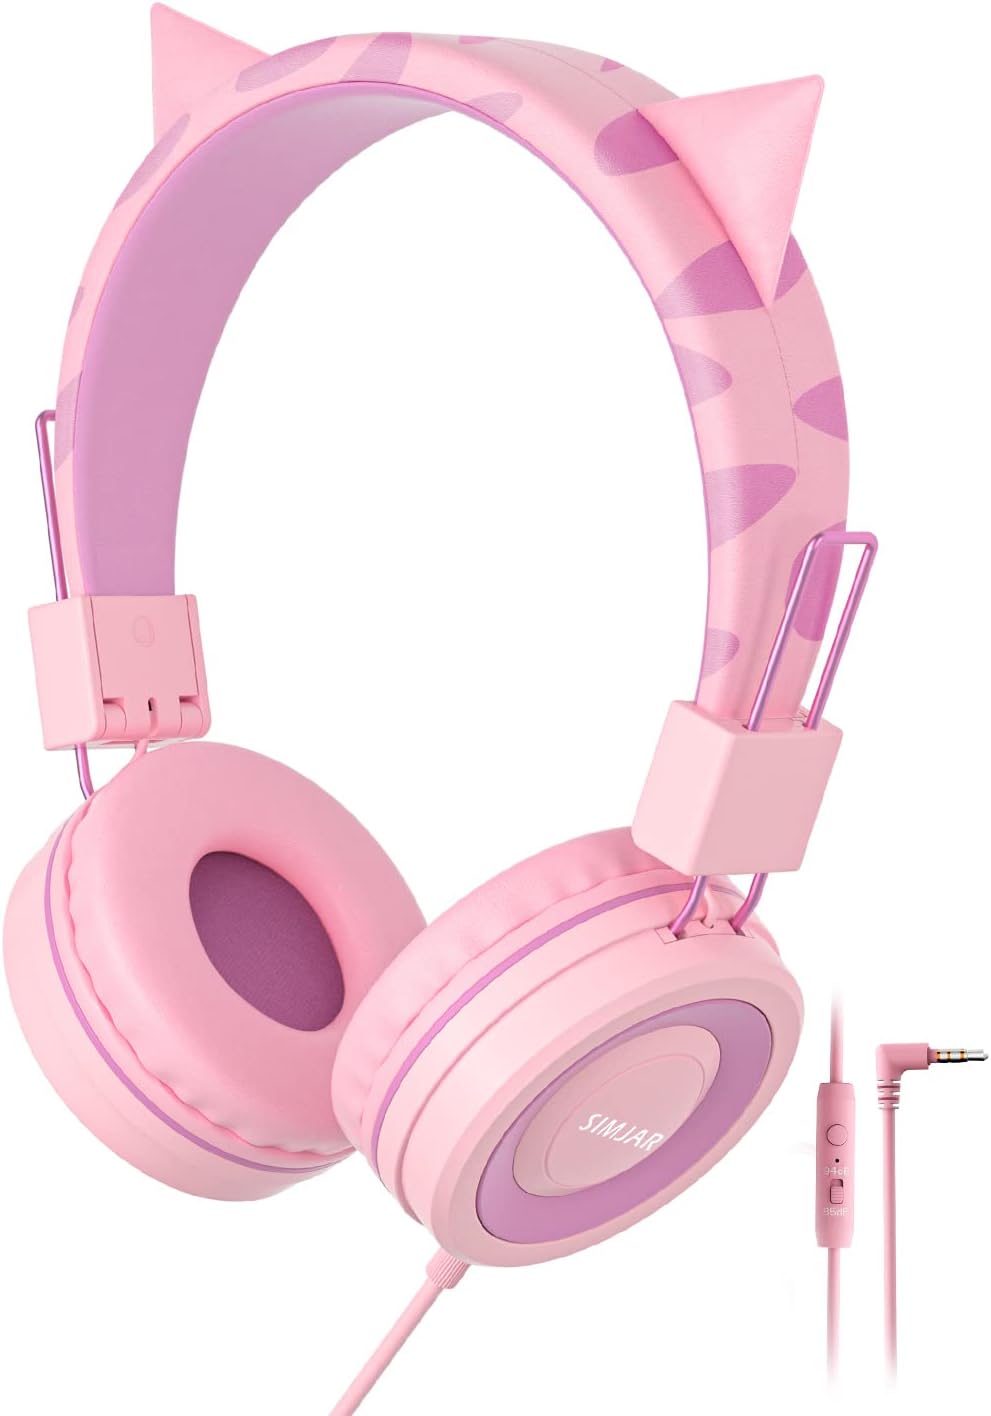 SIMJAR Cat Ear Kids Headphones with Microphone for School, Volume Limiter 85/94dB, Wired Girls Headphones with Foldable Design for Online Learning/Travel/Tablet/iPad (Pink)